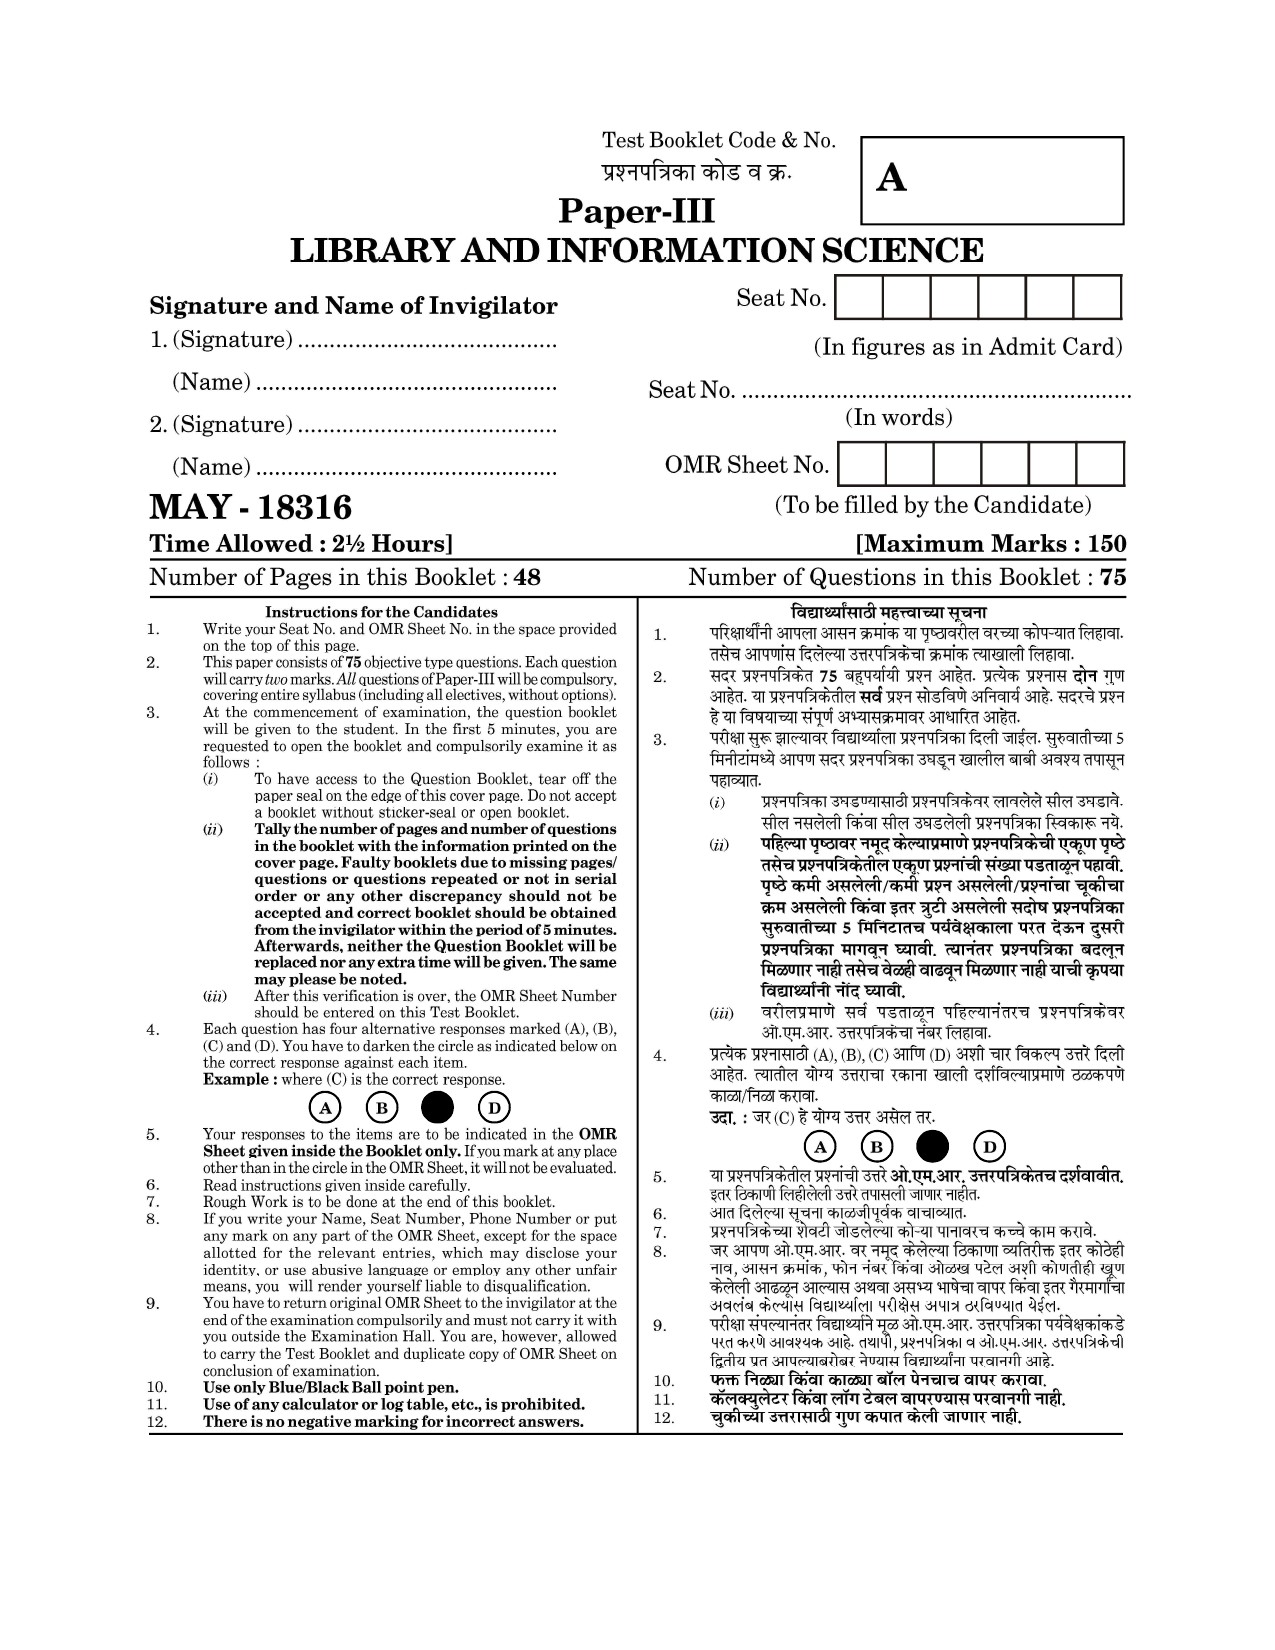 Maharashtra SET Library Information Science Question Paper III May 2016 1